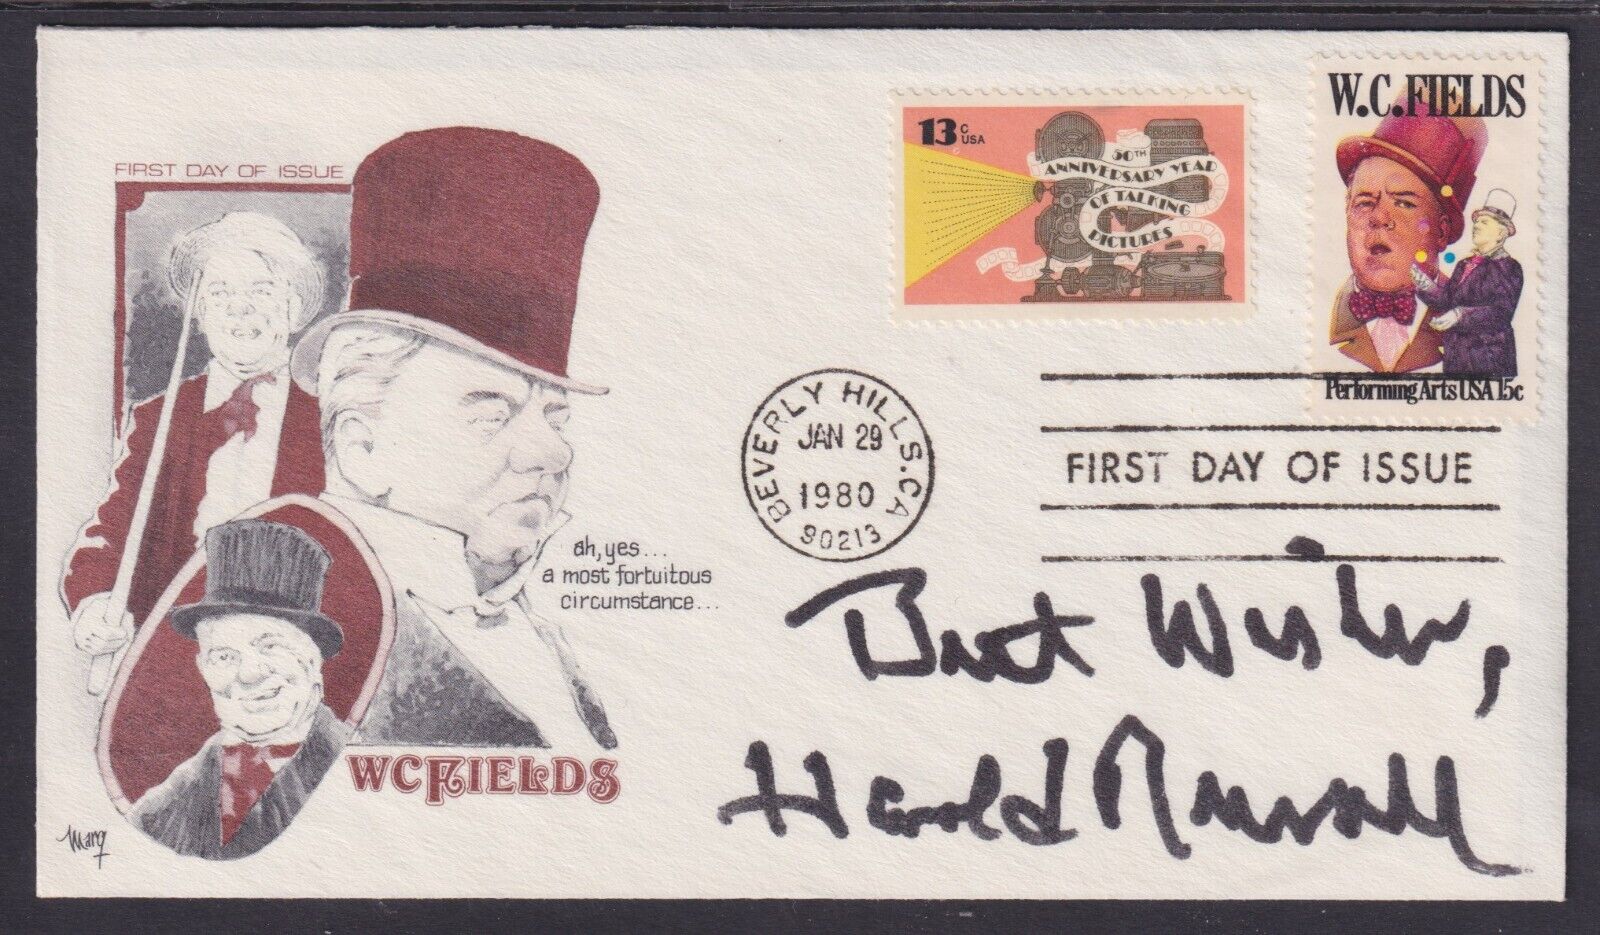 Harold Russell, American Actor & WWII Veteran, won 2 Academy Awards, signed FDC